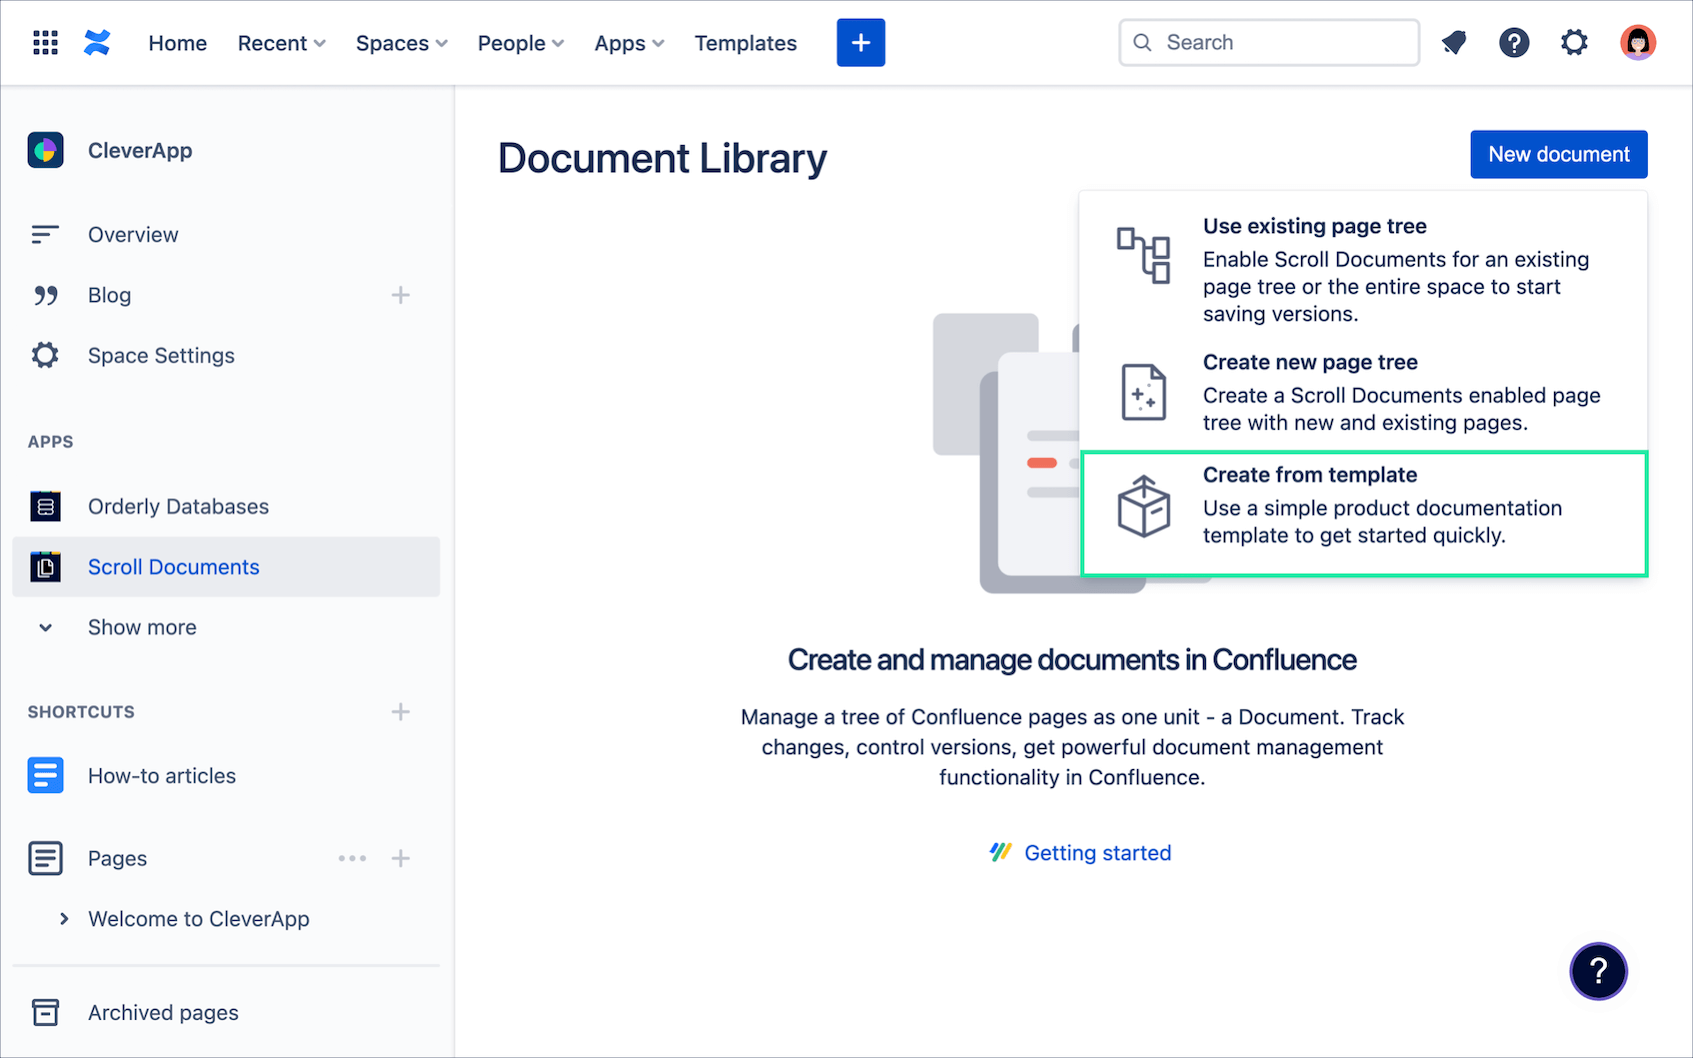 Select New document option Create from template